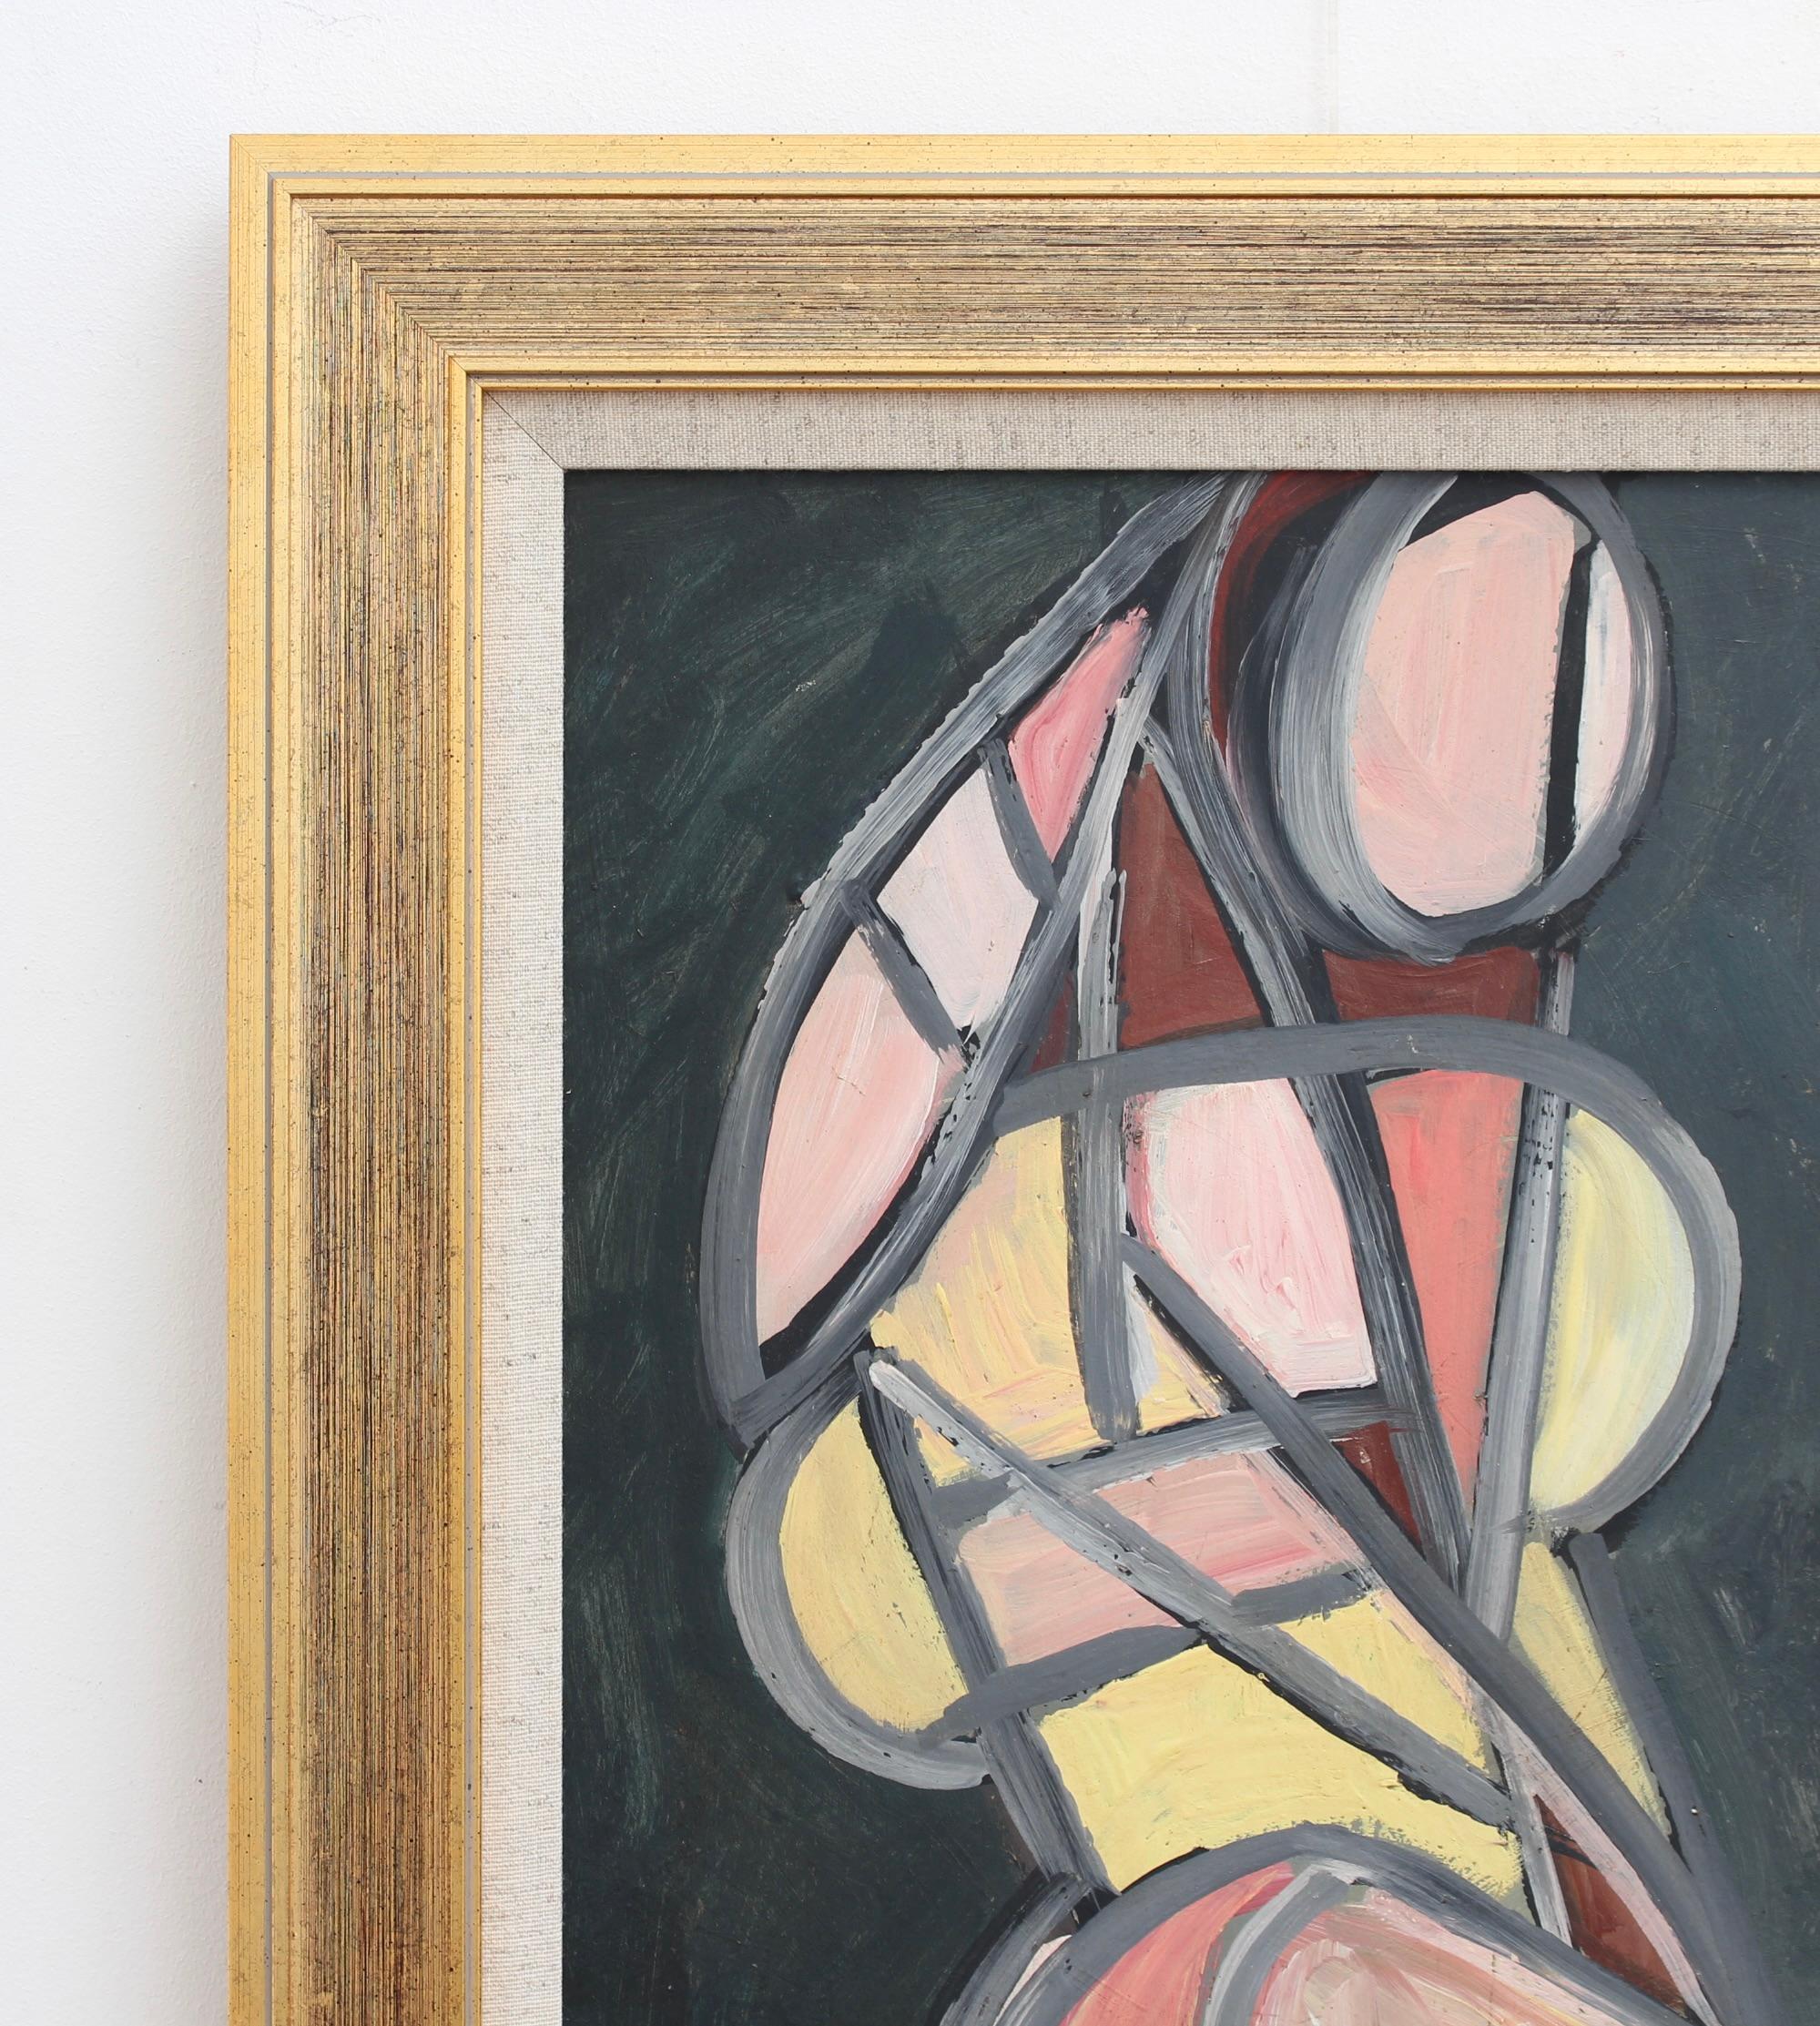 'Abstract Prism: Radiant Cubist Figure', oil on board, by STM (circa 1970s). A marvellous late mid-century, medium-sized painting by an artist with the initials STM. Clearly inspired by cubists Picasso and Braque, the artist uses angles, lines and